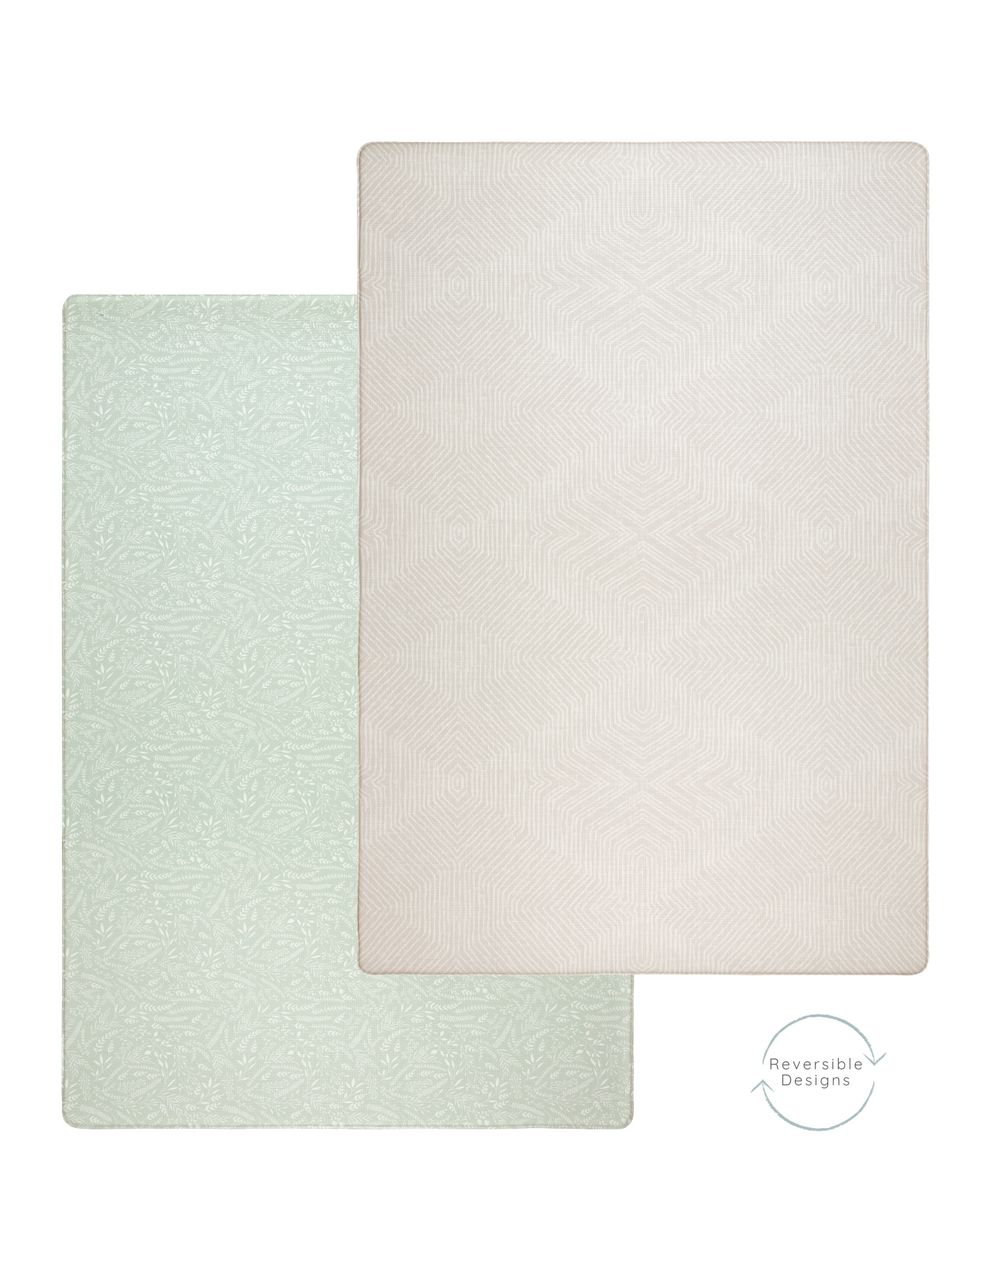 Beige play mat with light green play mat on the reverse designed with subtle motifs and colours to suit family homes and easy to flip over to enjoy a new look